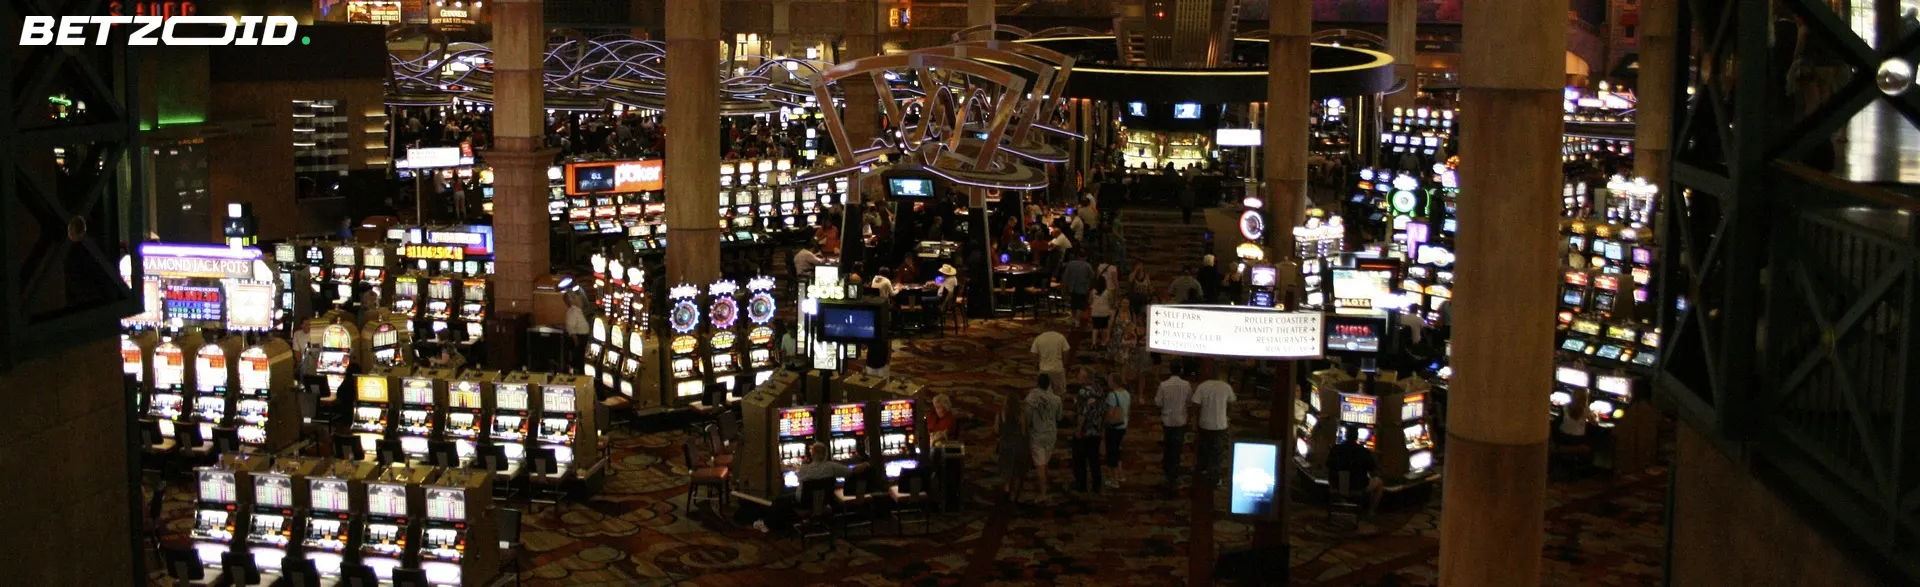 Vibrant casino floor with slot machines and gaming tables for offshore online gambling in Canada.